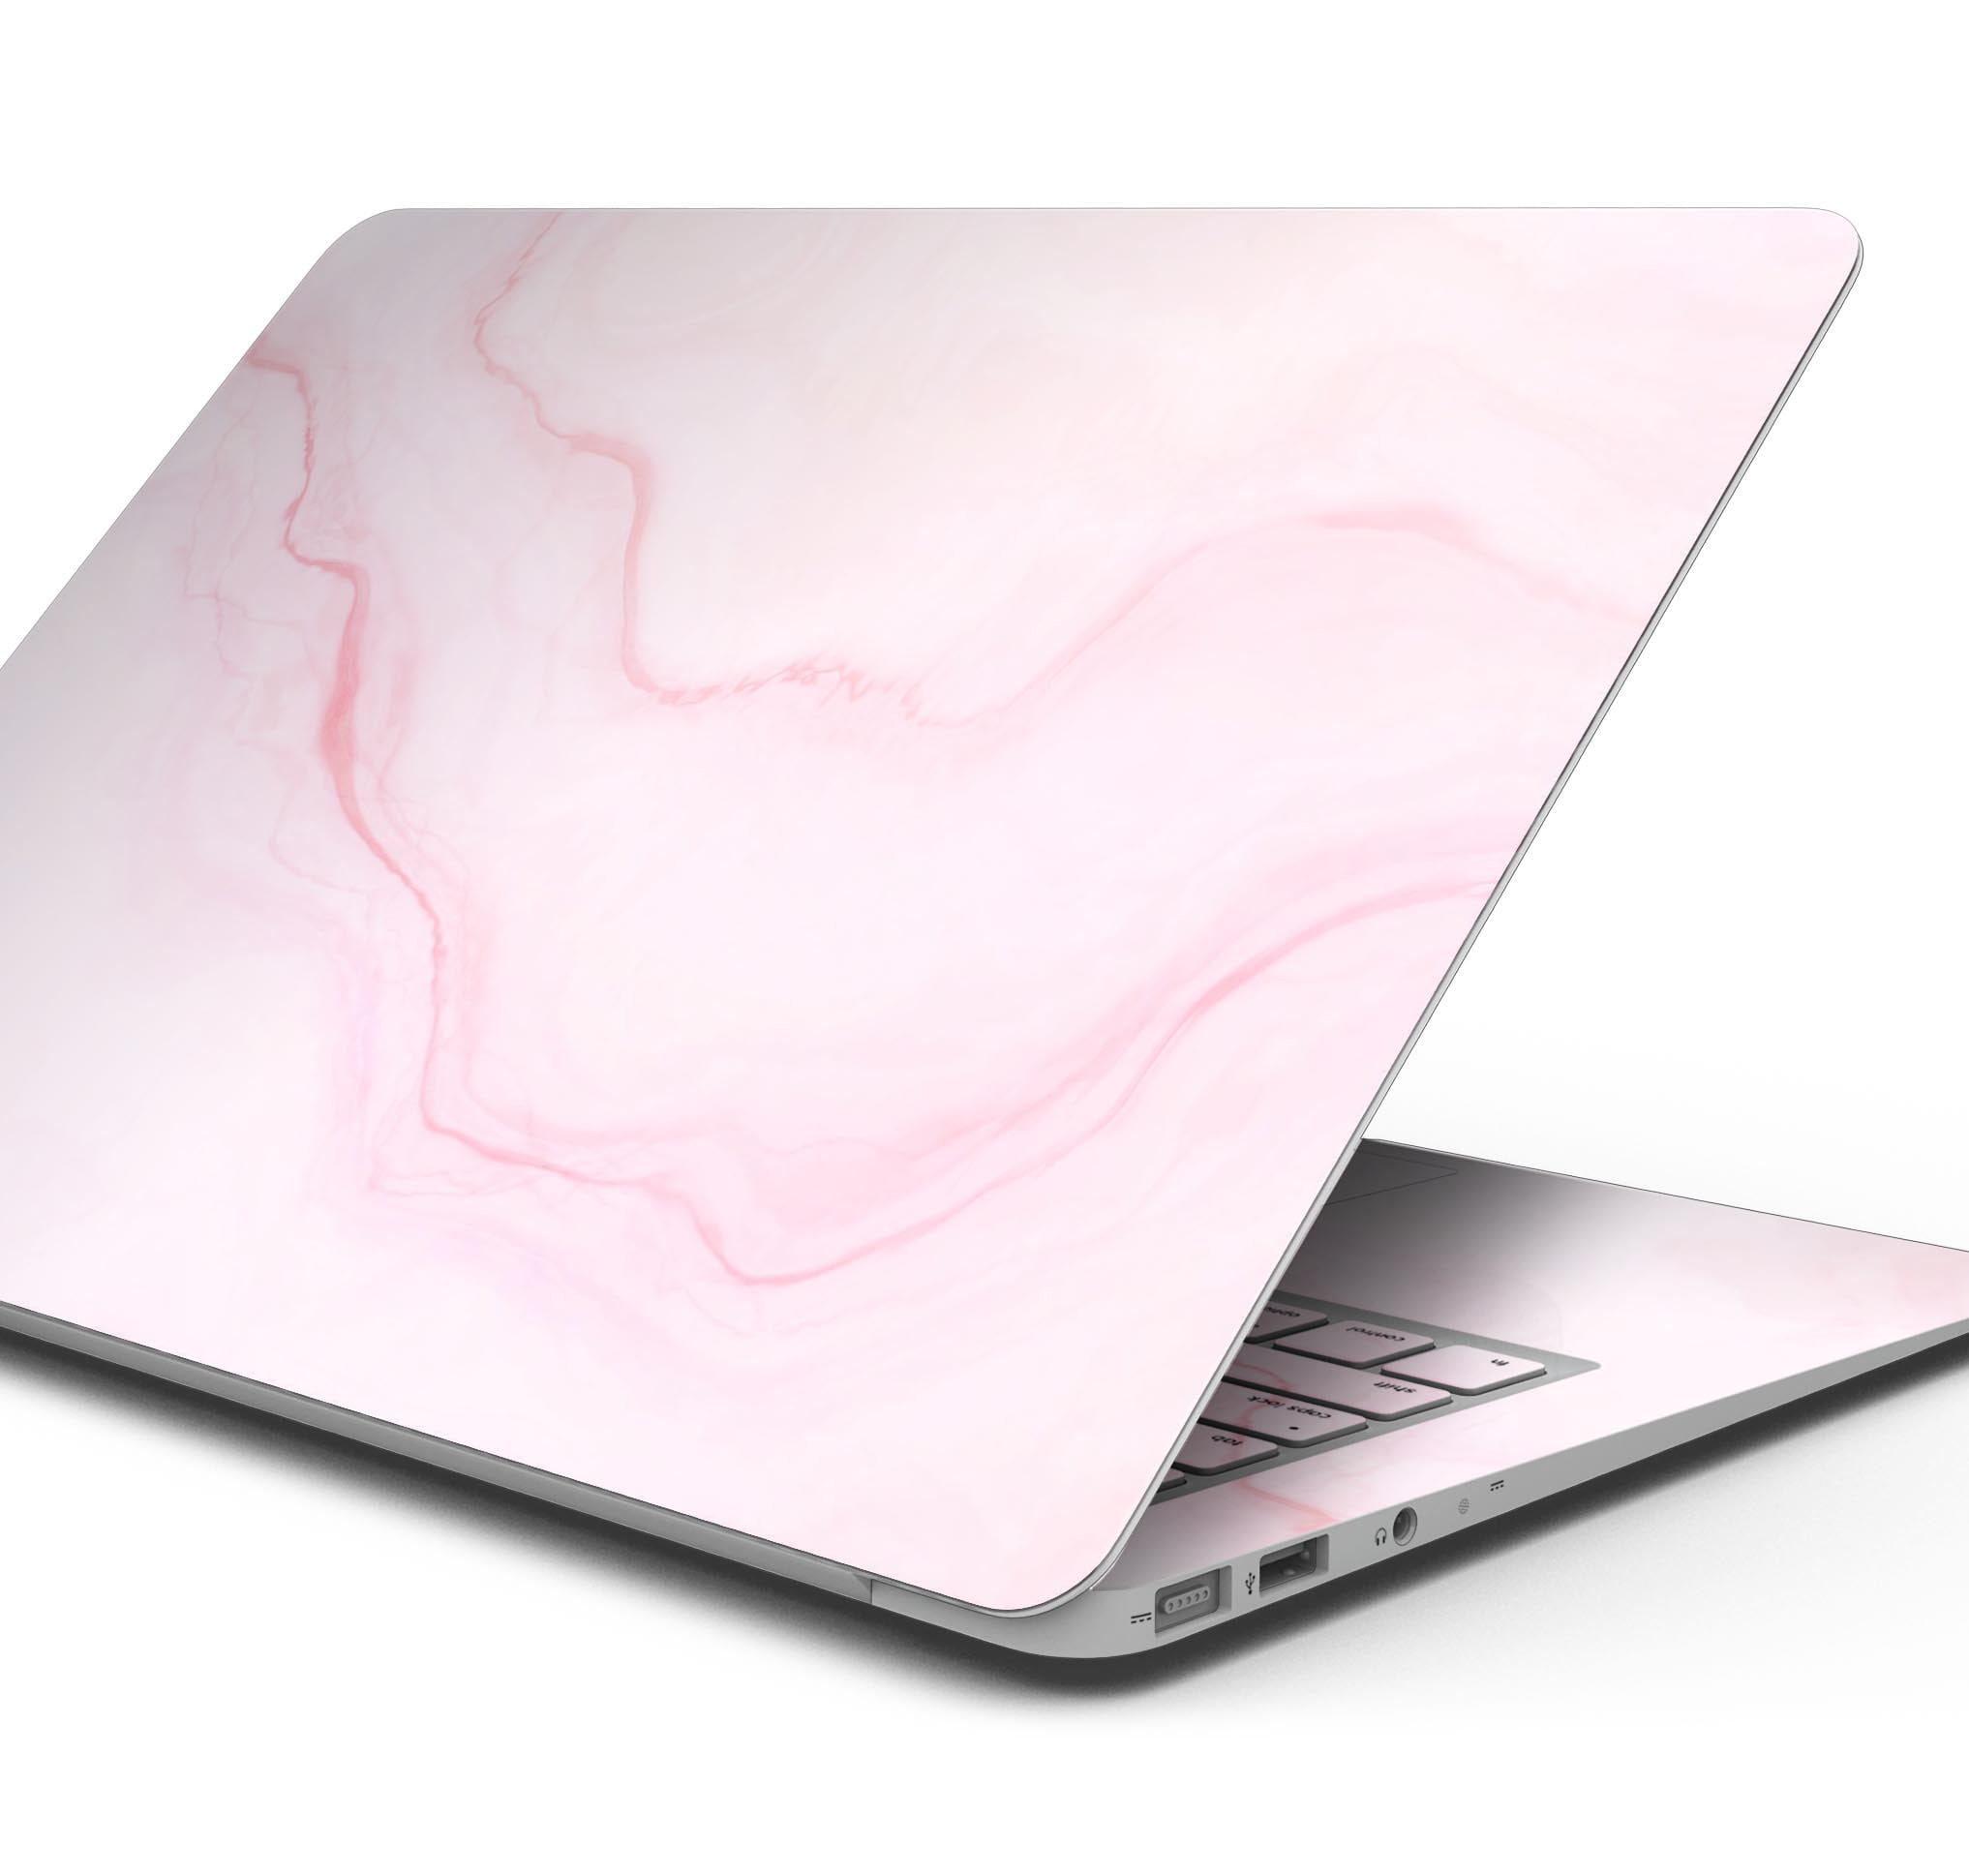 Marble White MacBook Decal Air 13 MacBook 13 Touch Bar 2021 Dark Blue Marble  MacBook Air 11 MacBook 12 MacBook Abstract Decal 13 Pro 2020